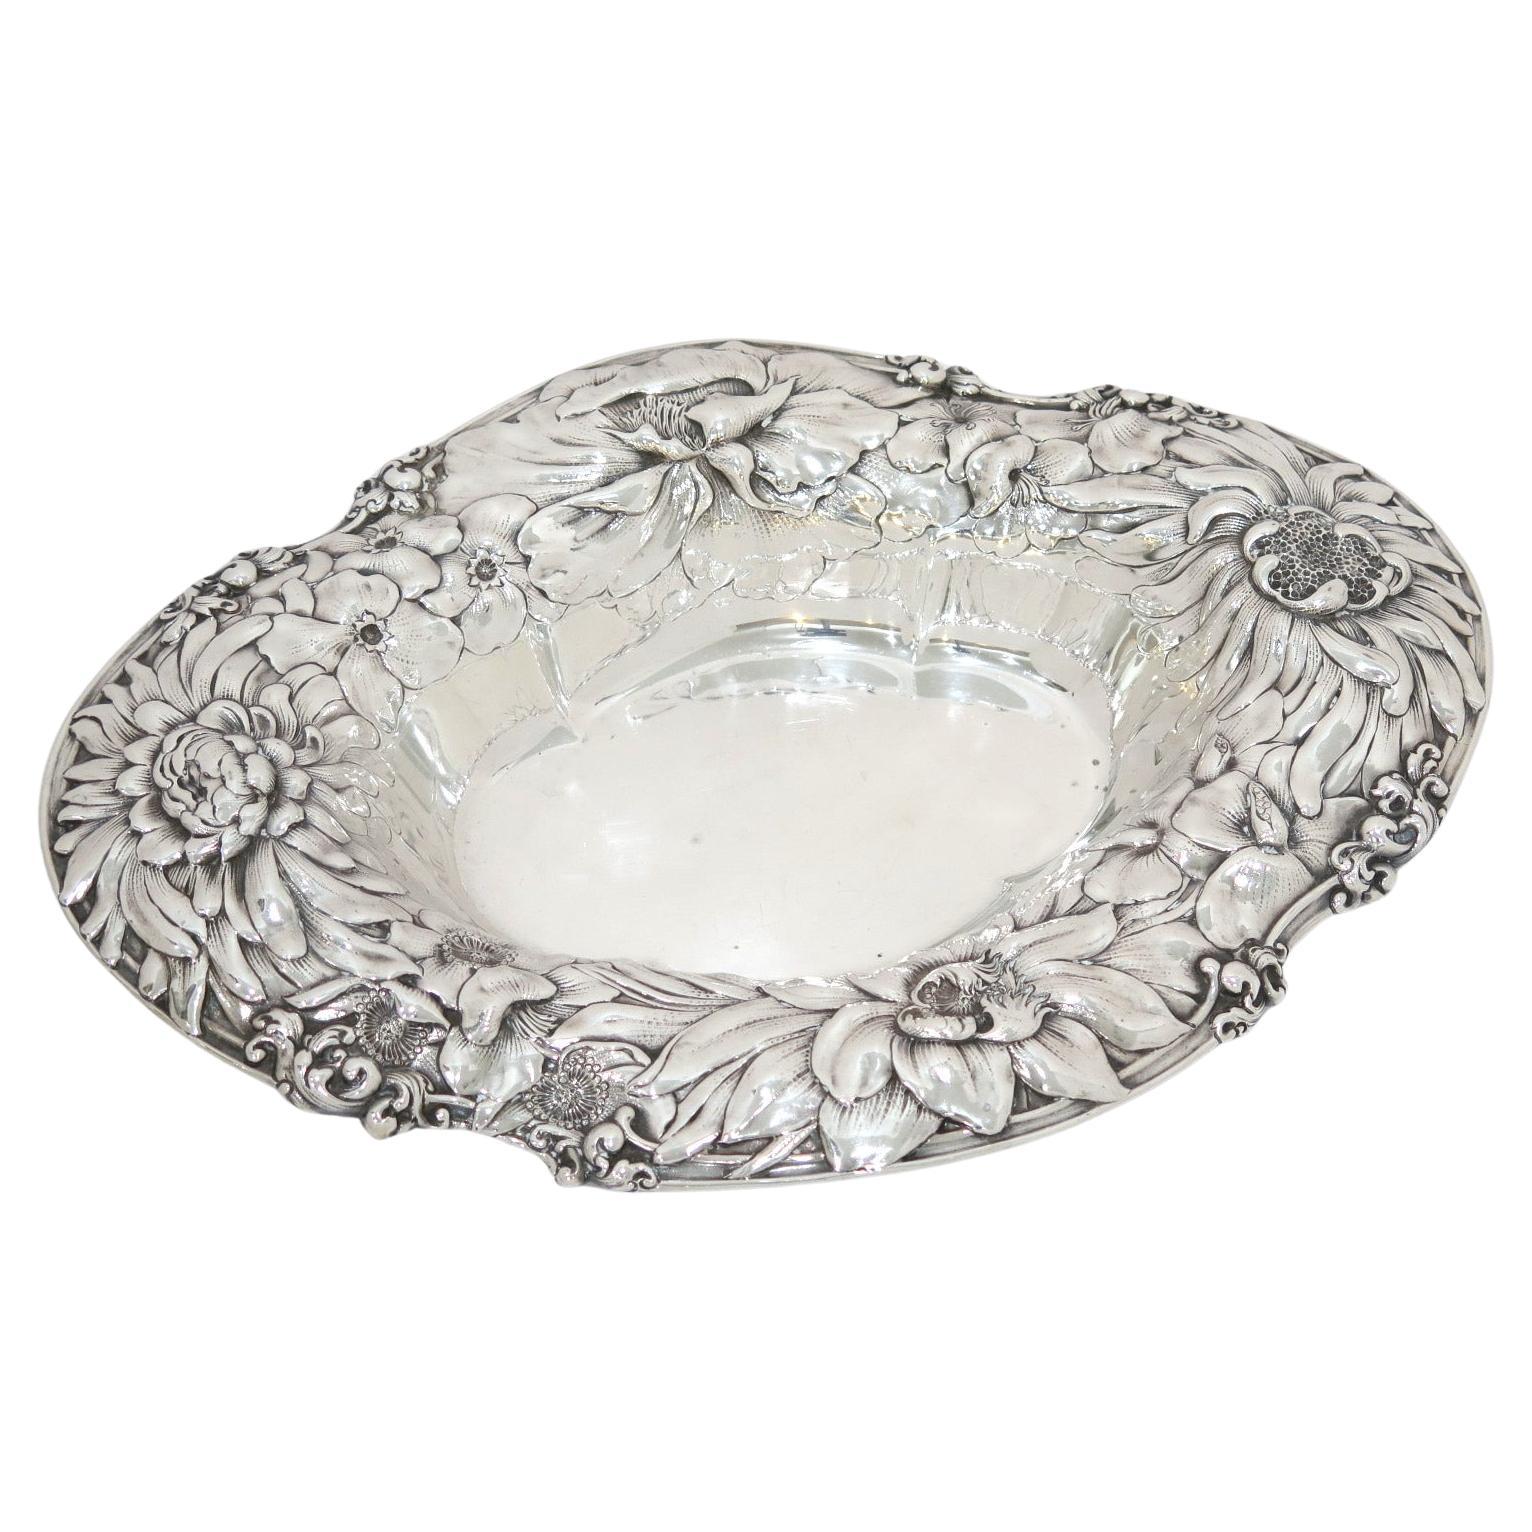 15 in - Sterling Silver Gorham Antique Floral Repousse Oval Serving Bowl For Sale